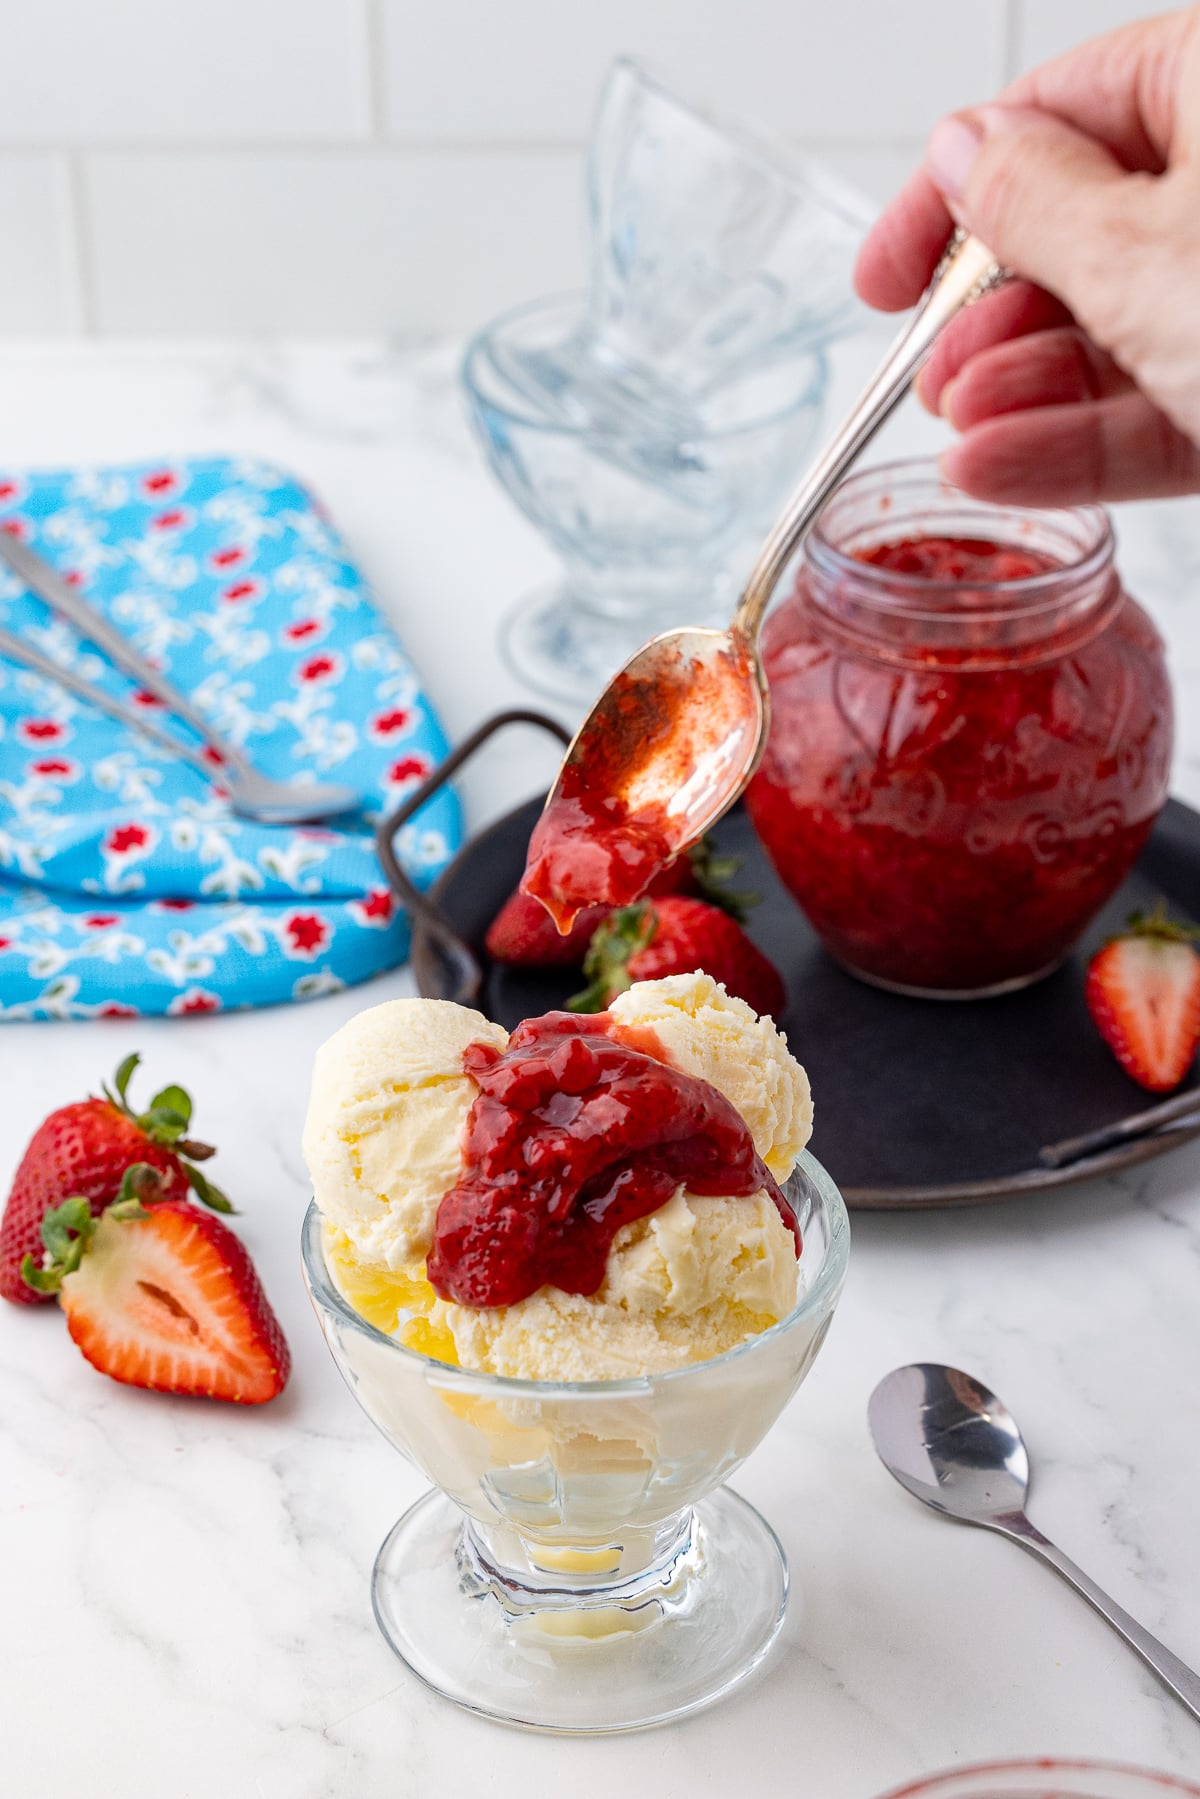 Strawberry compote spooned on three scoops of vanilla ice cream in an ice cream sundae dish with a strawberries, a blue dishcloth, and a strawberry shaped jar on a white countertop